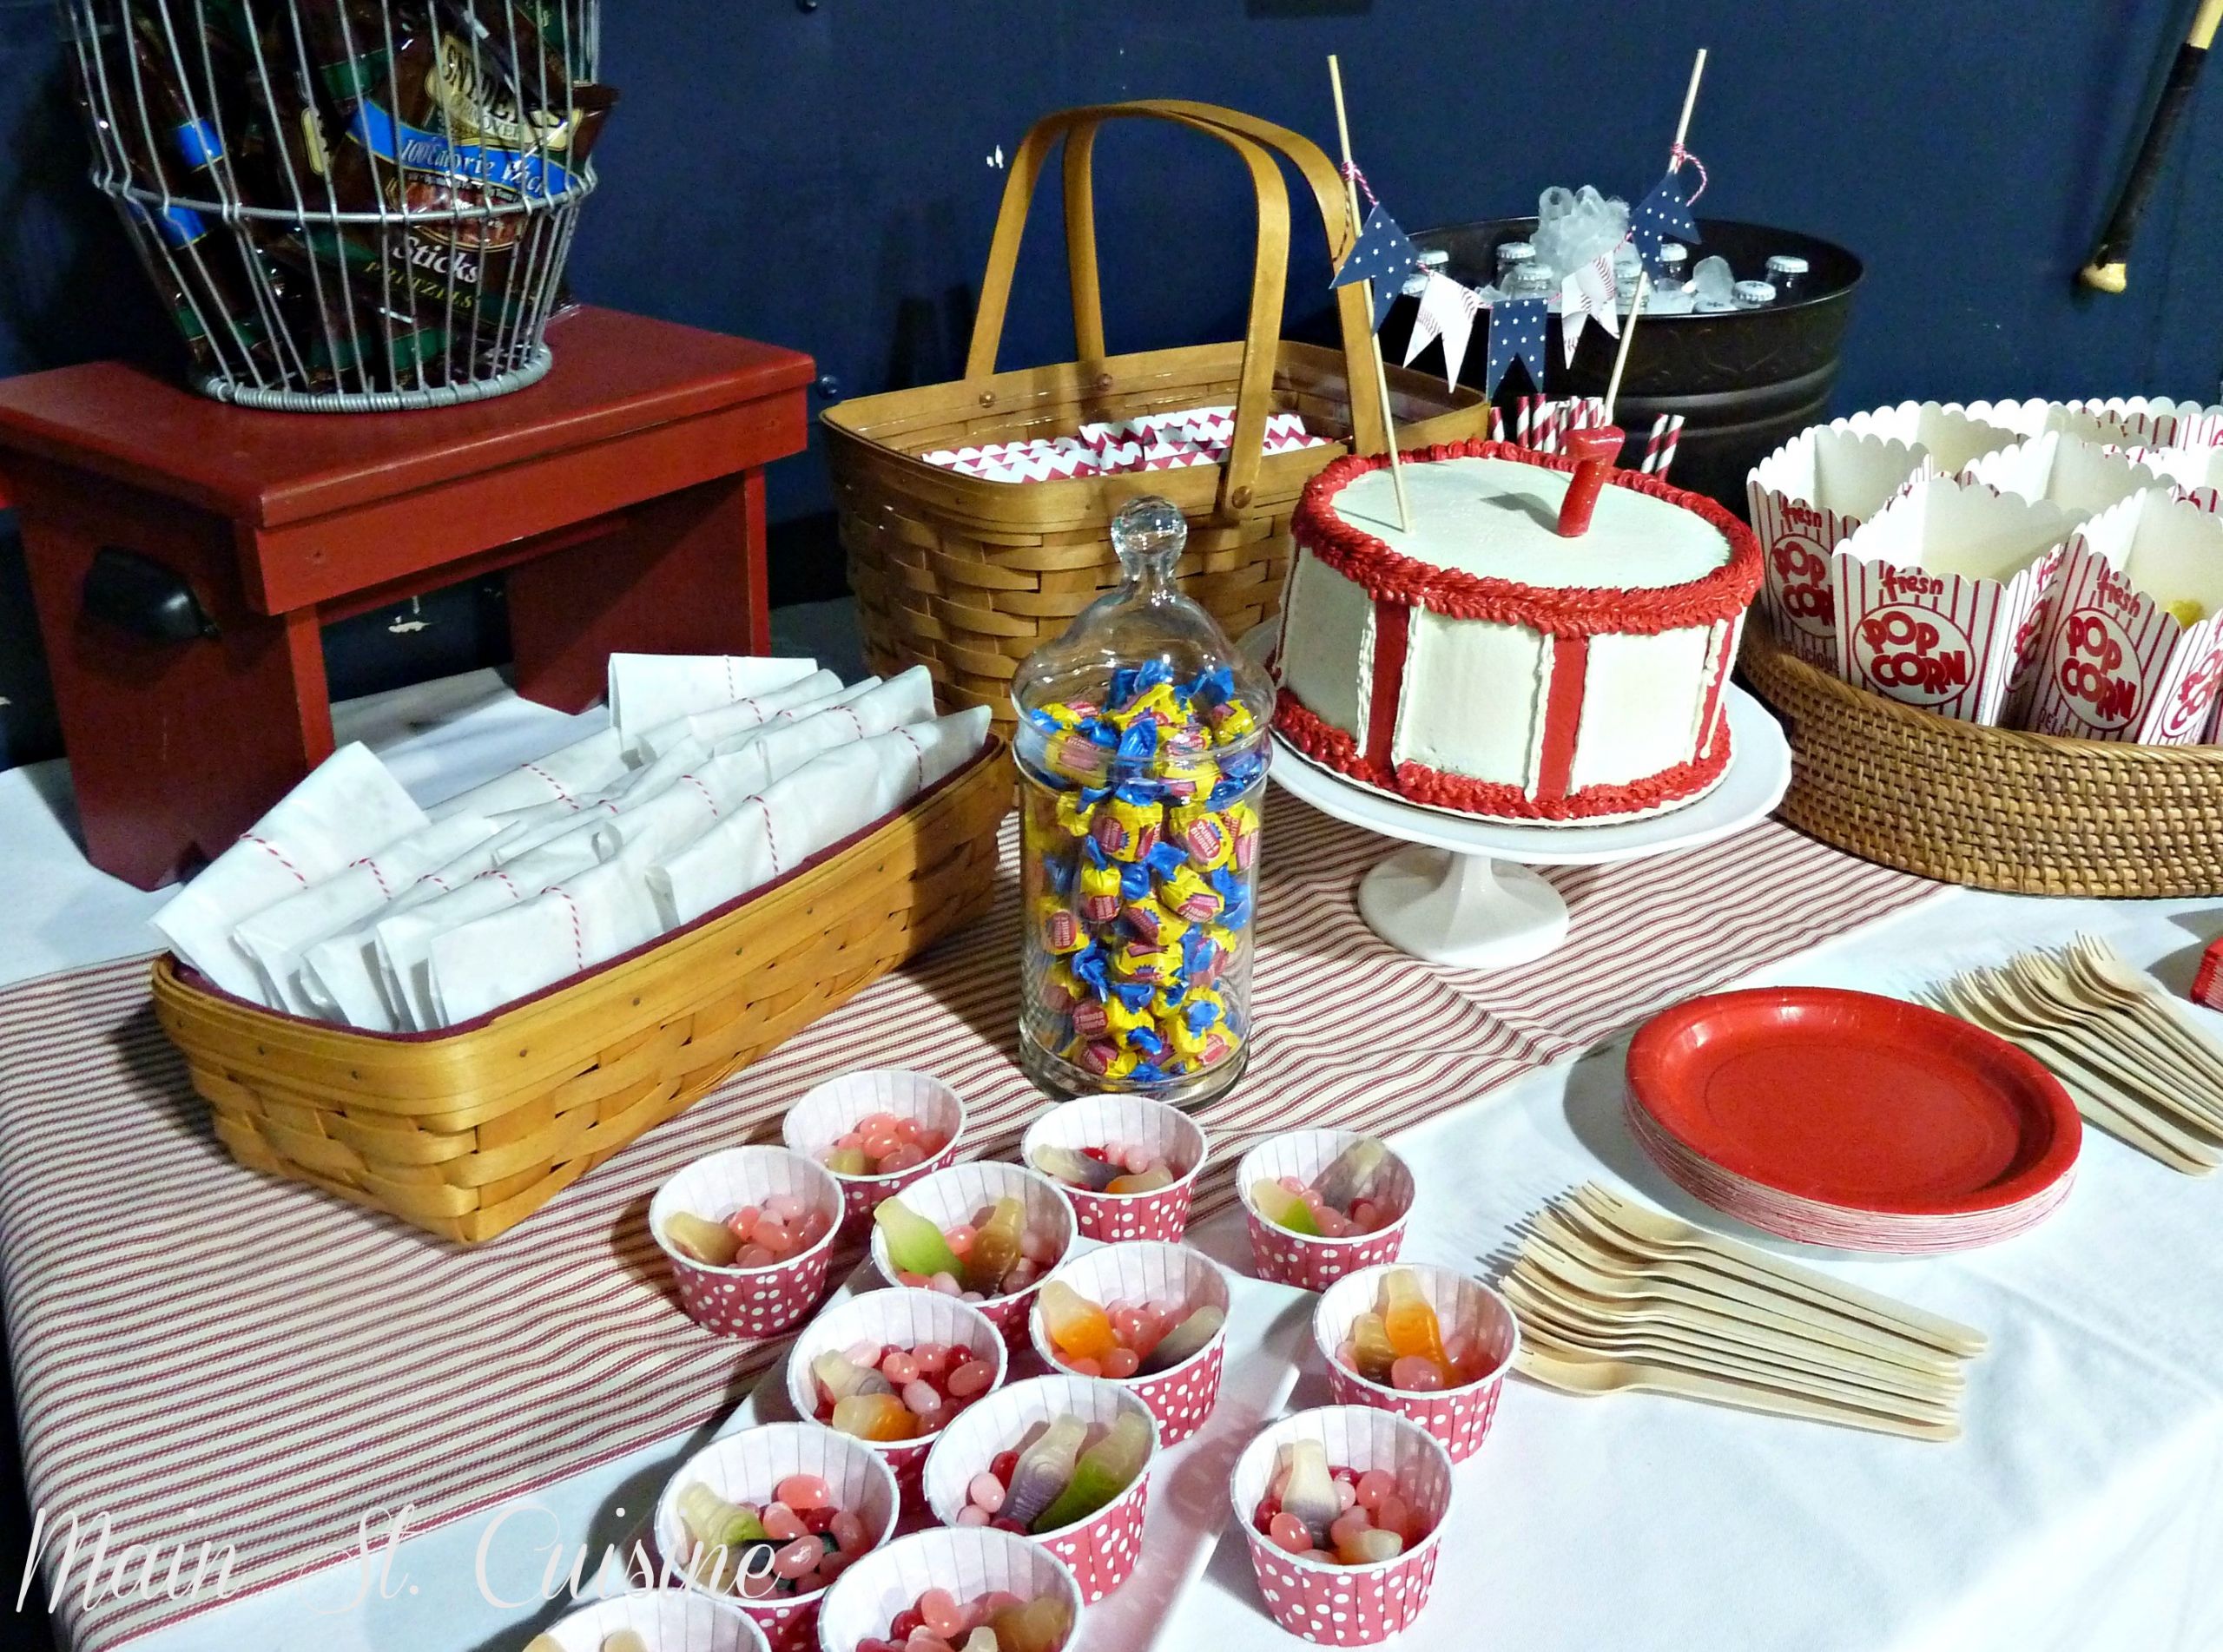 Baseball Themed Birthday Party
 Tips for Throwing a Baseball Themed Birthday Party